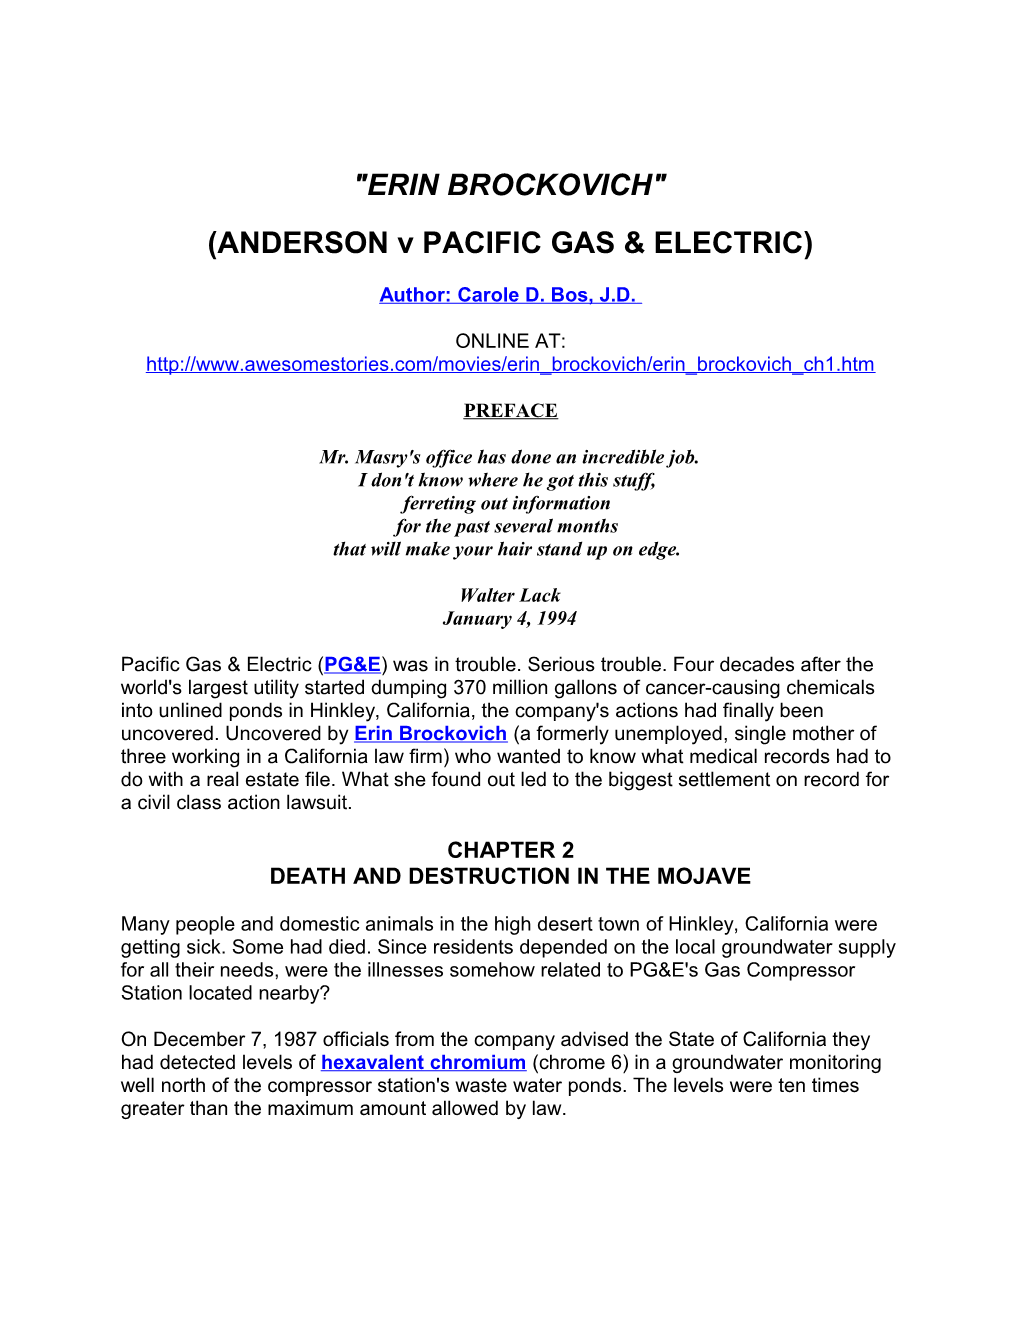 ANDERSON V PACIFIC GAS & ELECTRIC